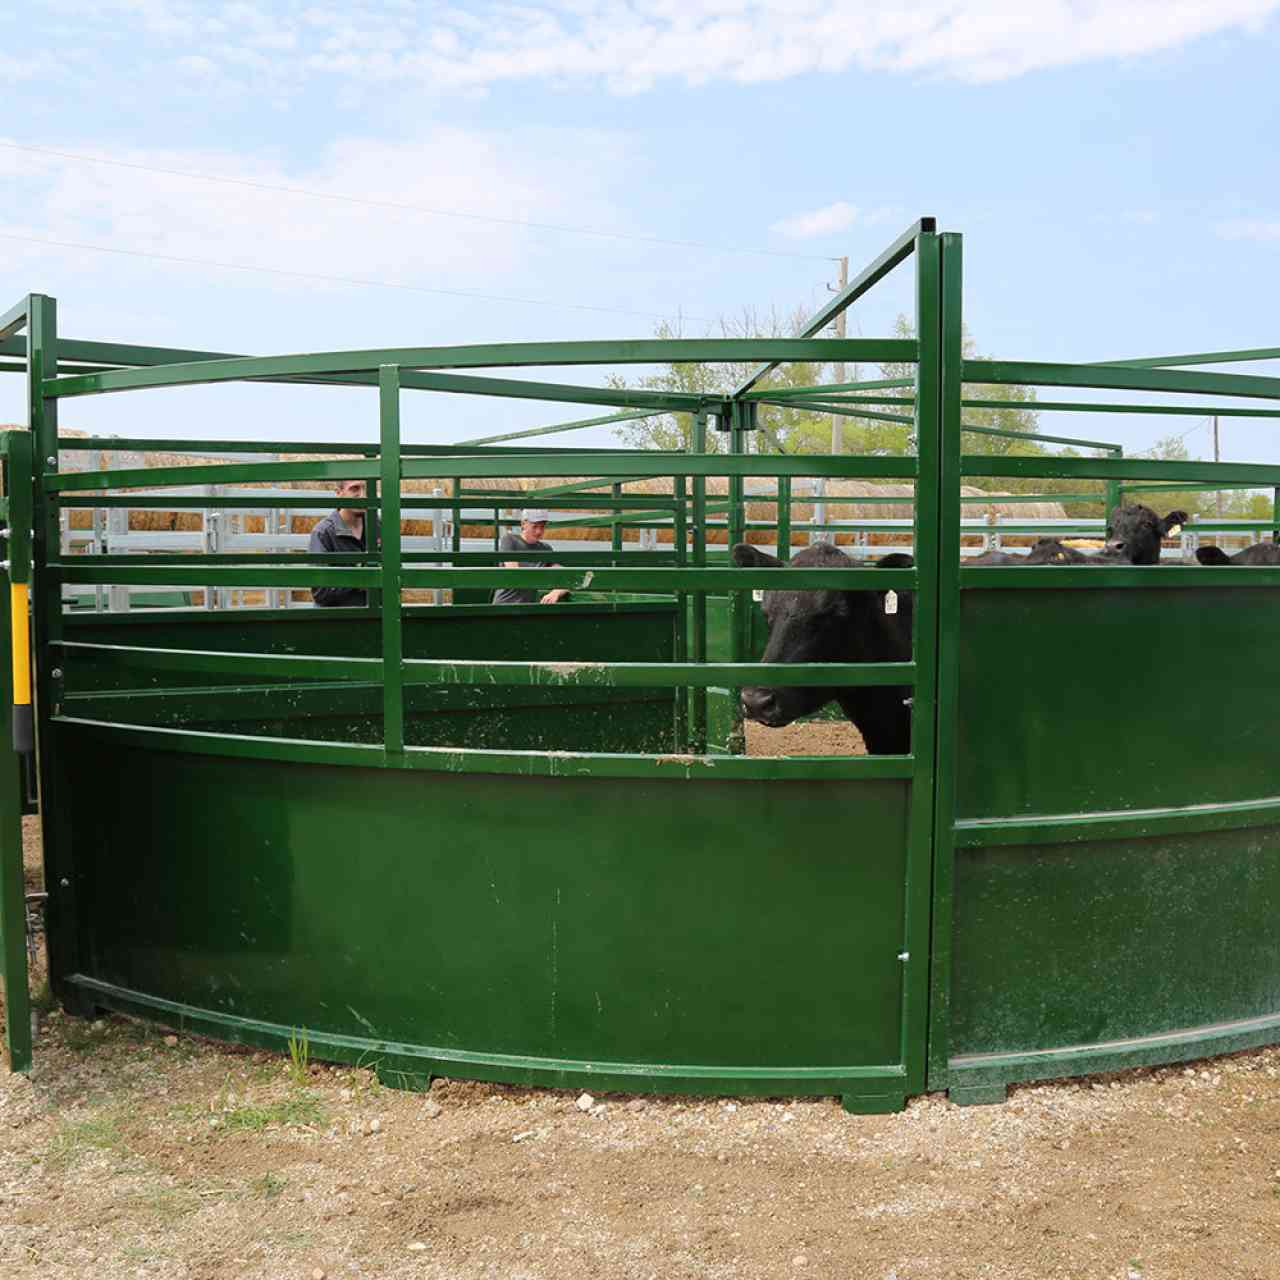 3E System using Cattle Crowding Tub with Cattle looking out.